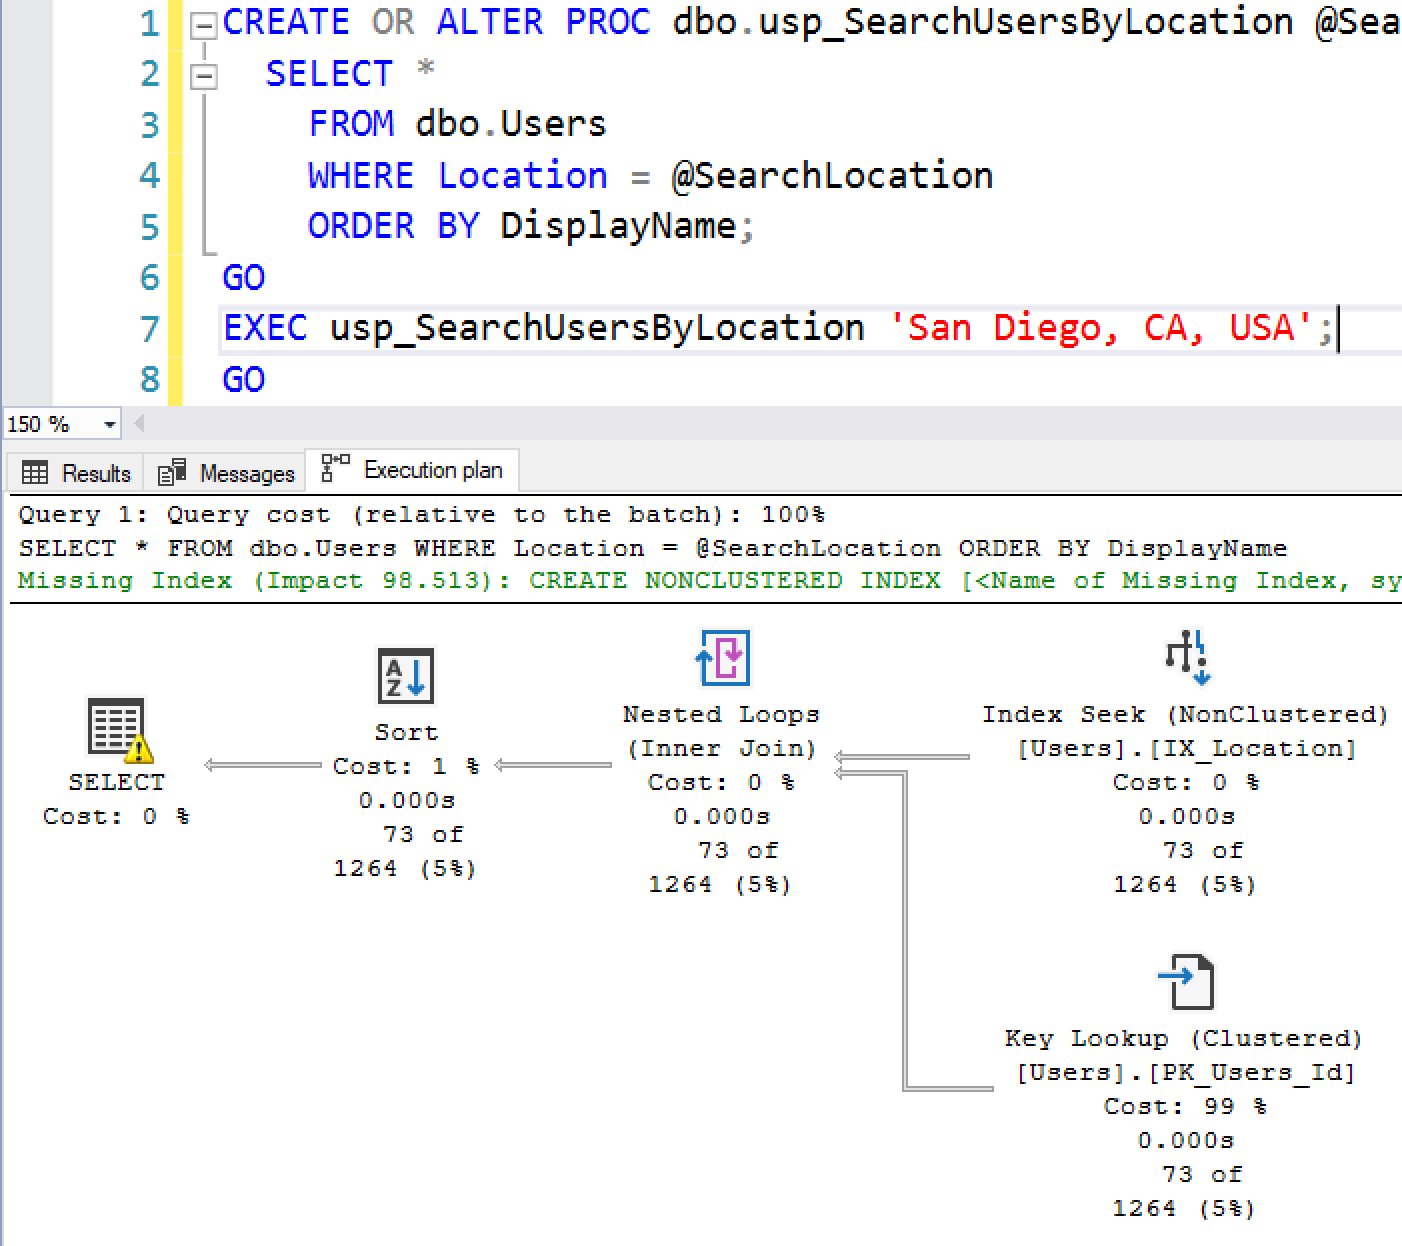 SQL 'ALTER PROCEDURE' Statement: A Detailed Guide